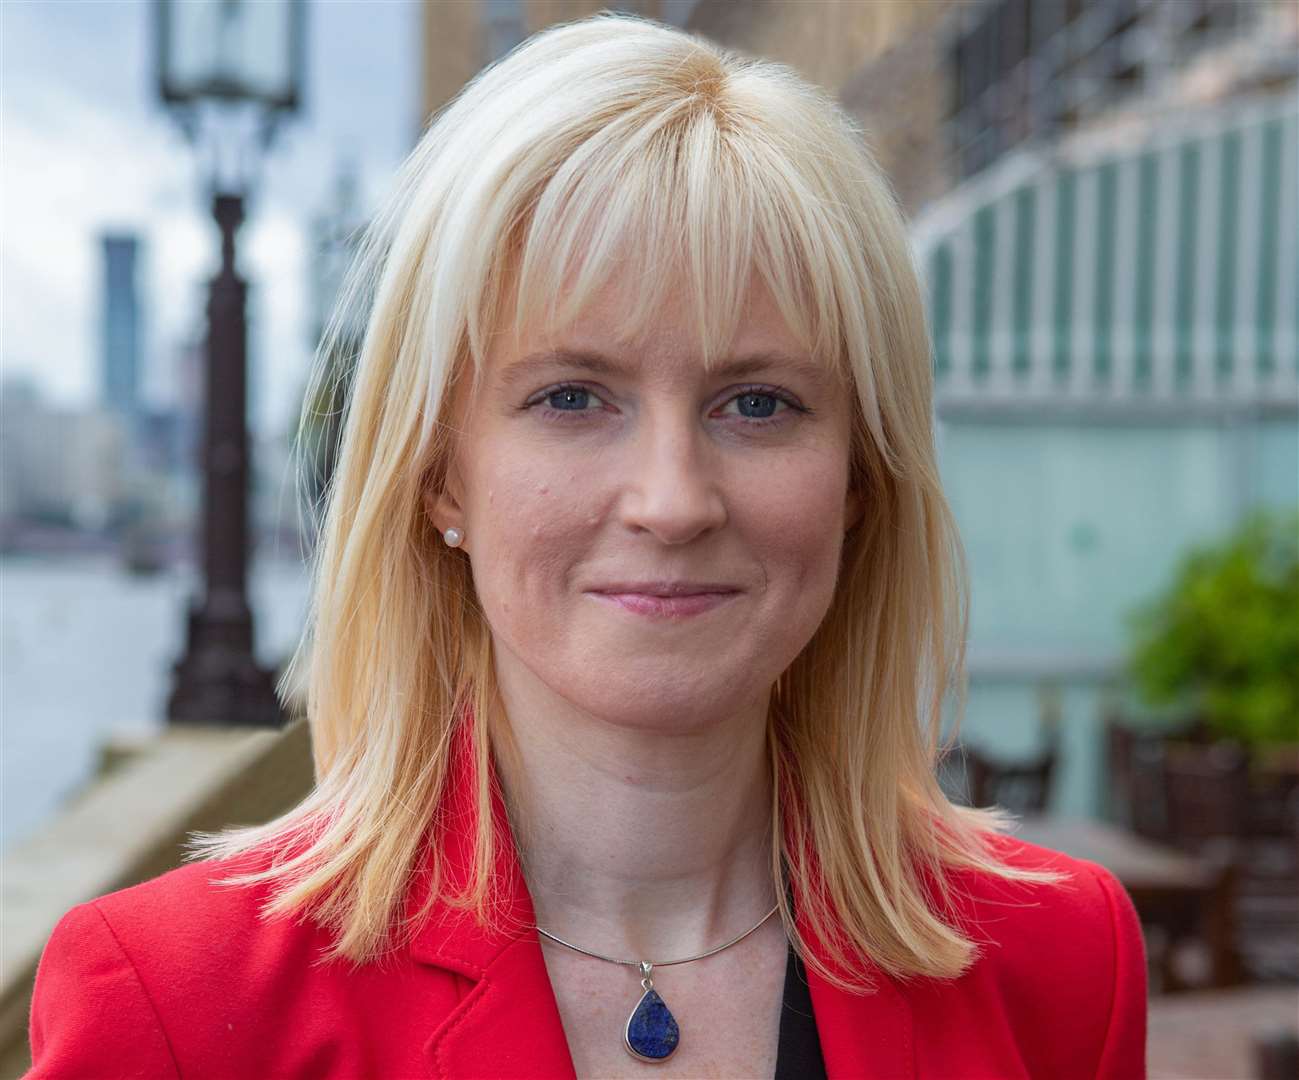 Labour candidate Rosie Duffield